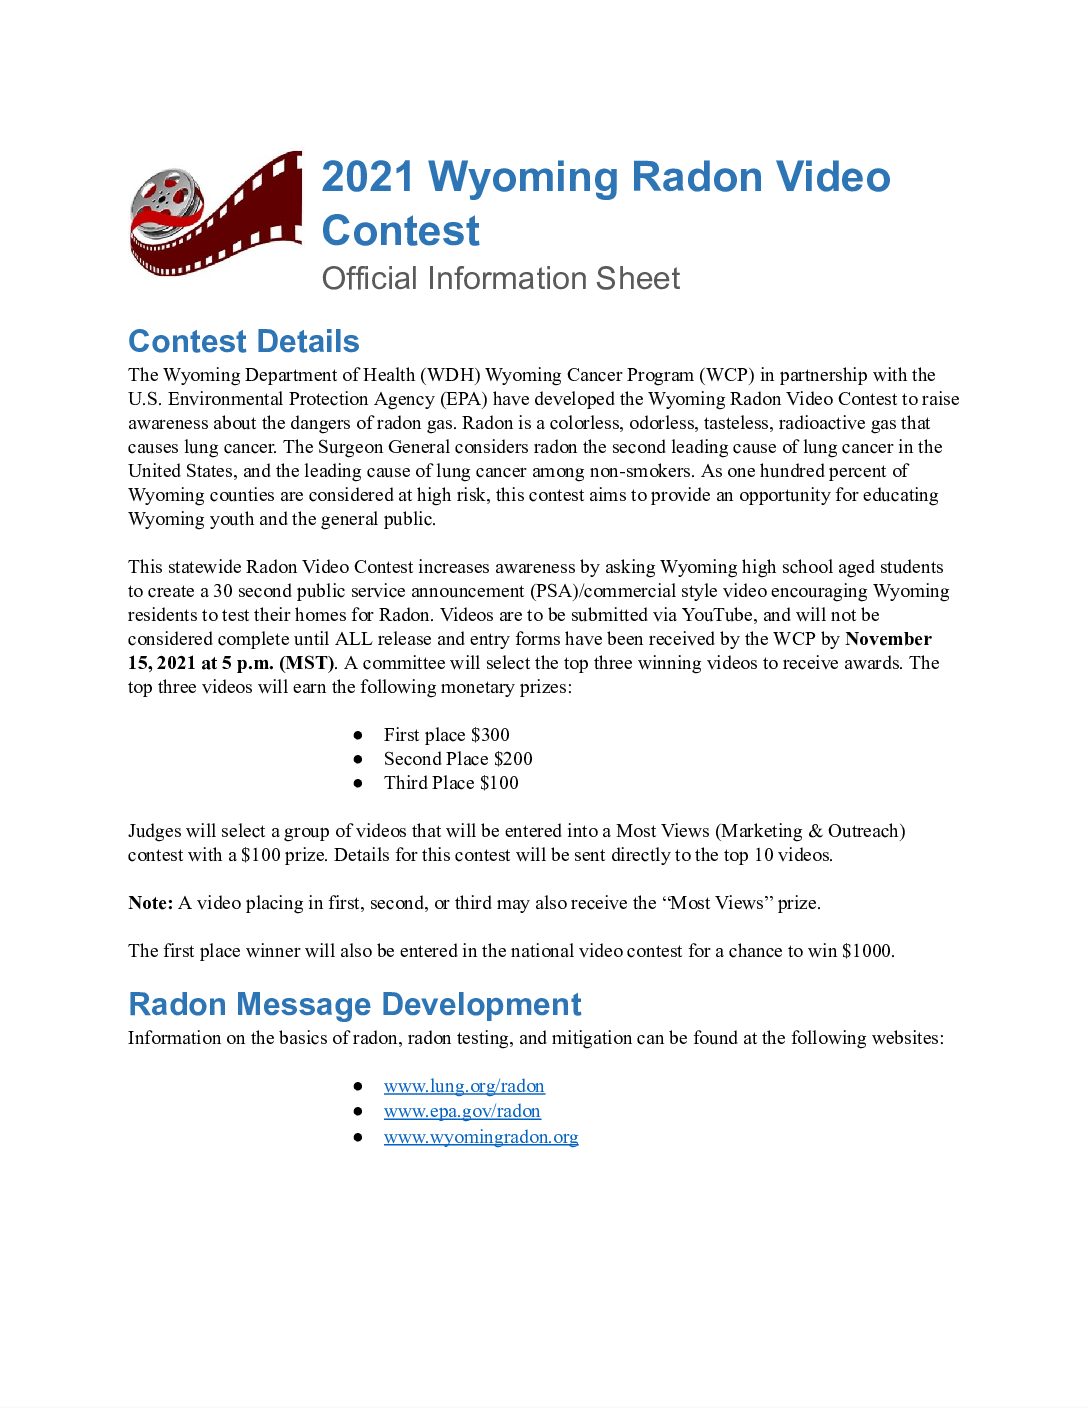 2021 Video Contest Rules document - Wyoming Department of Health